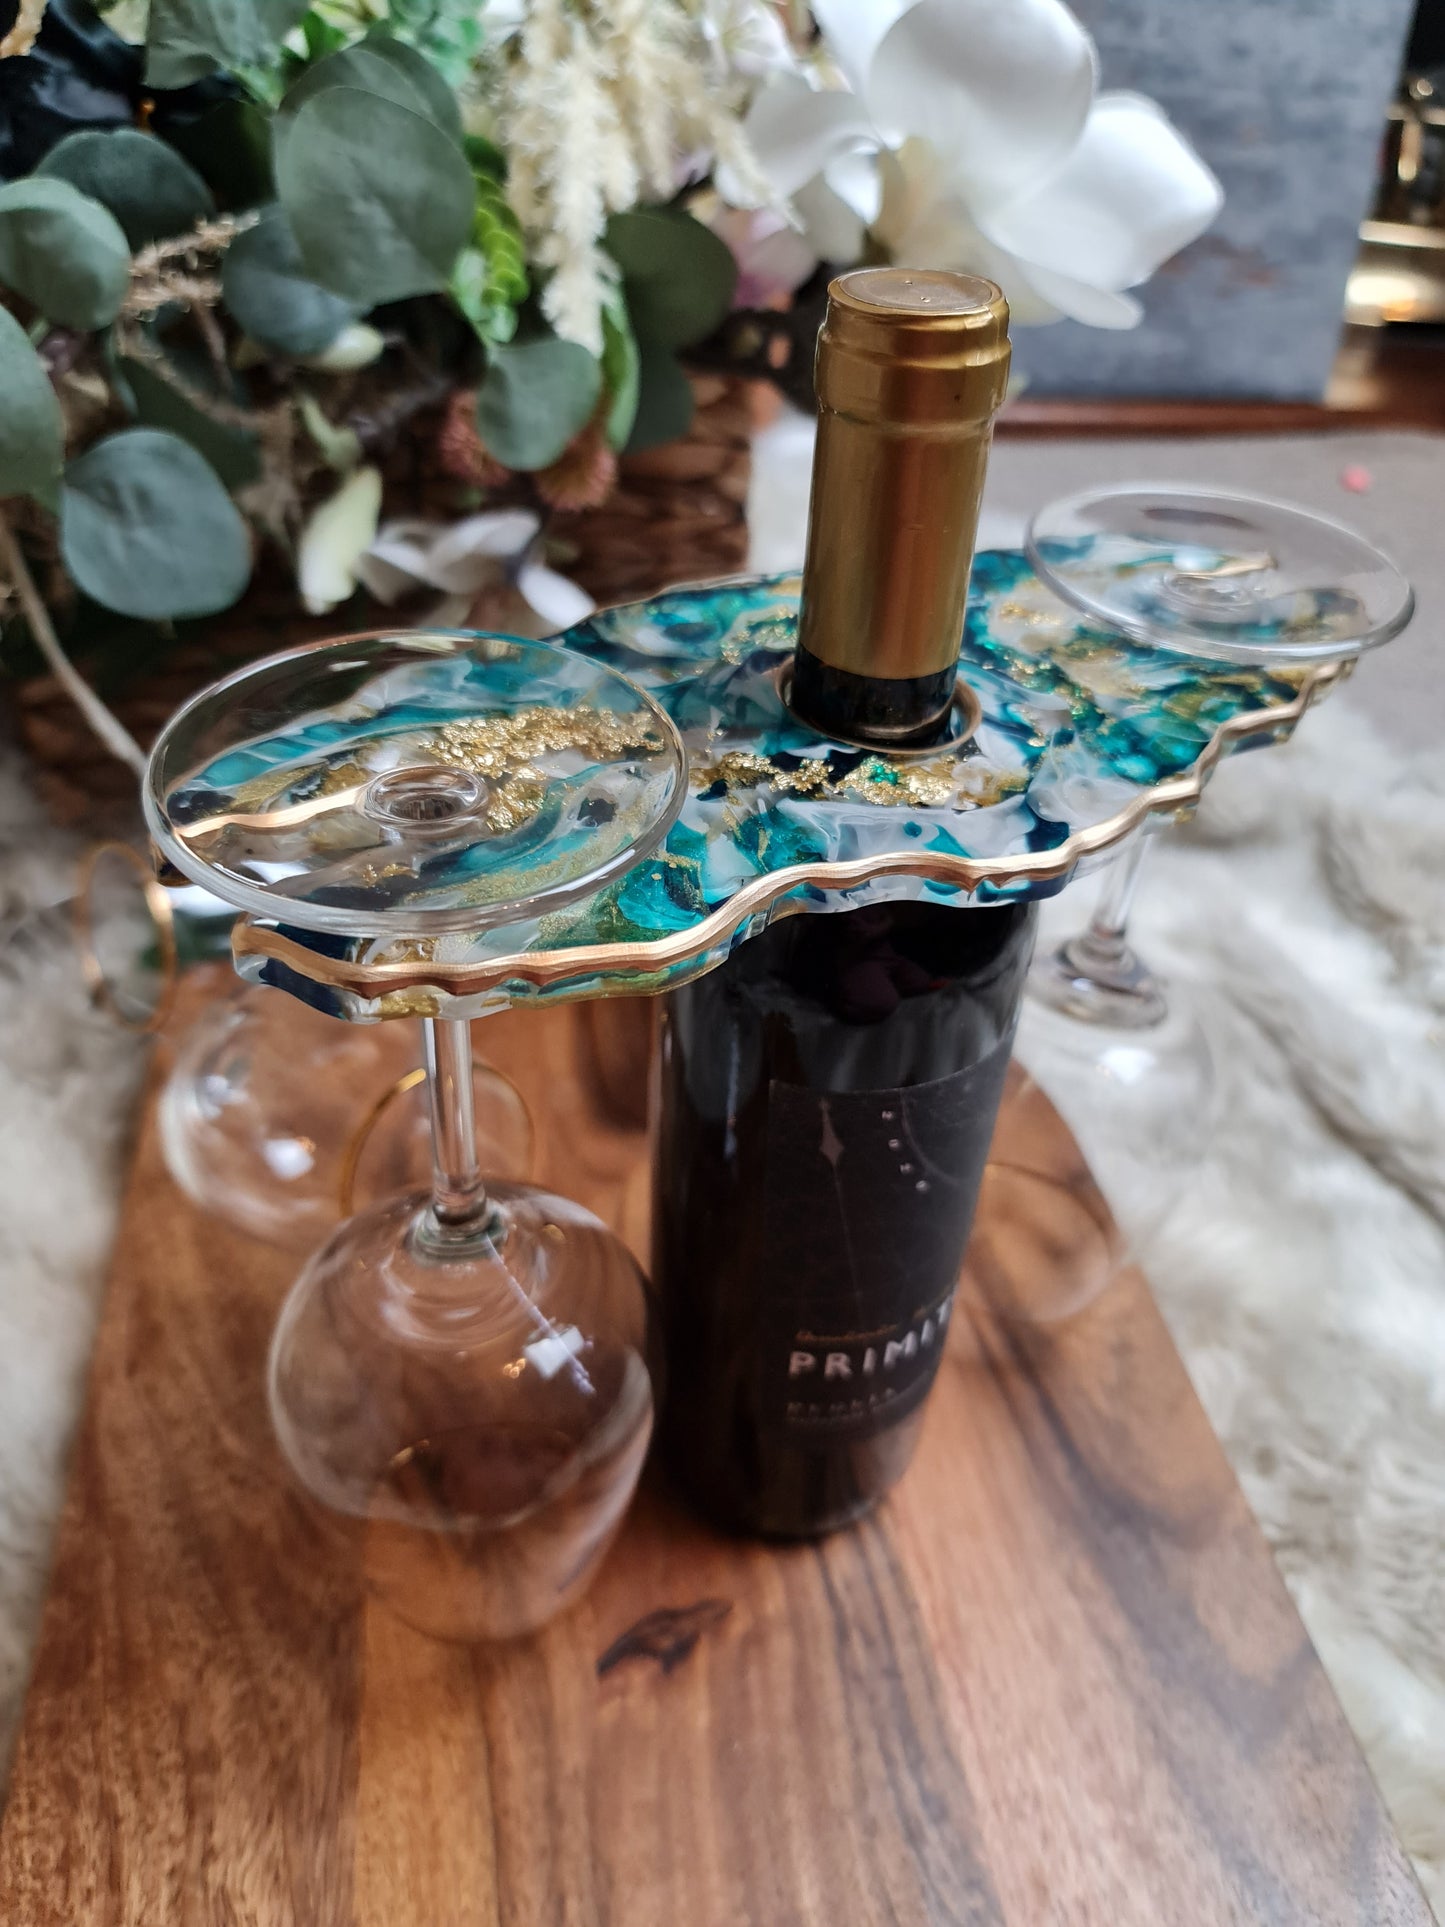 Glass and bottle holder in turqoise and gold